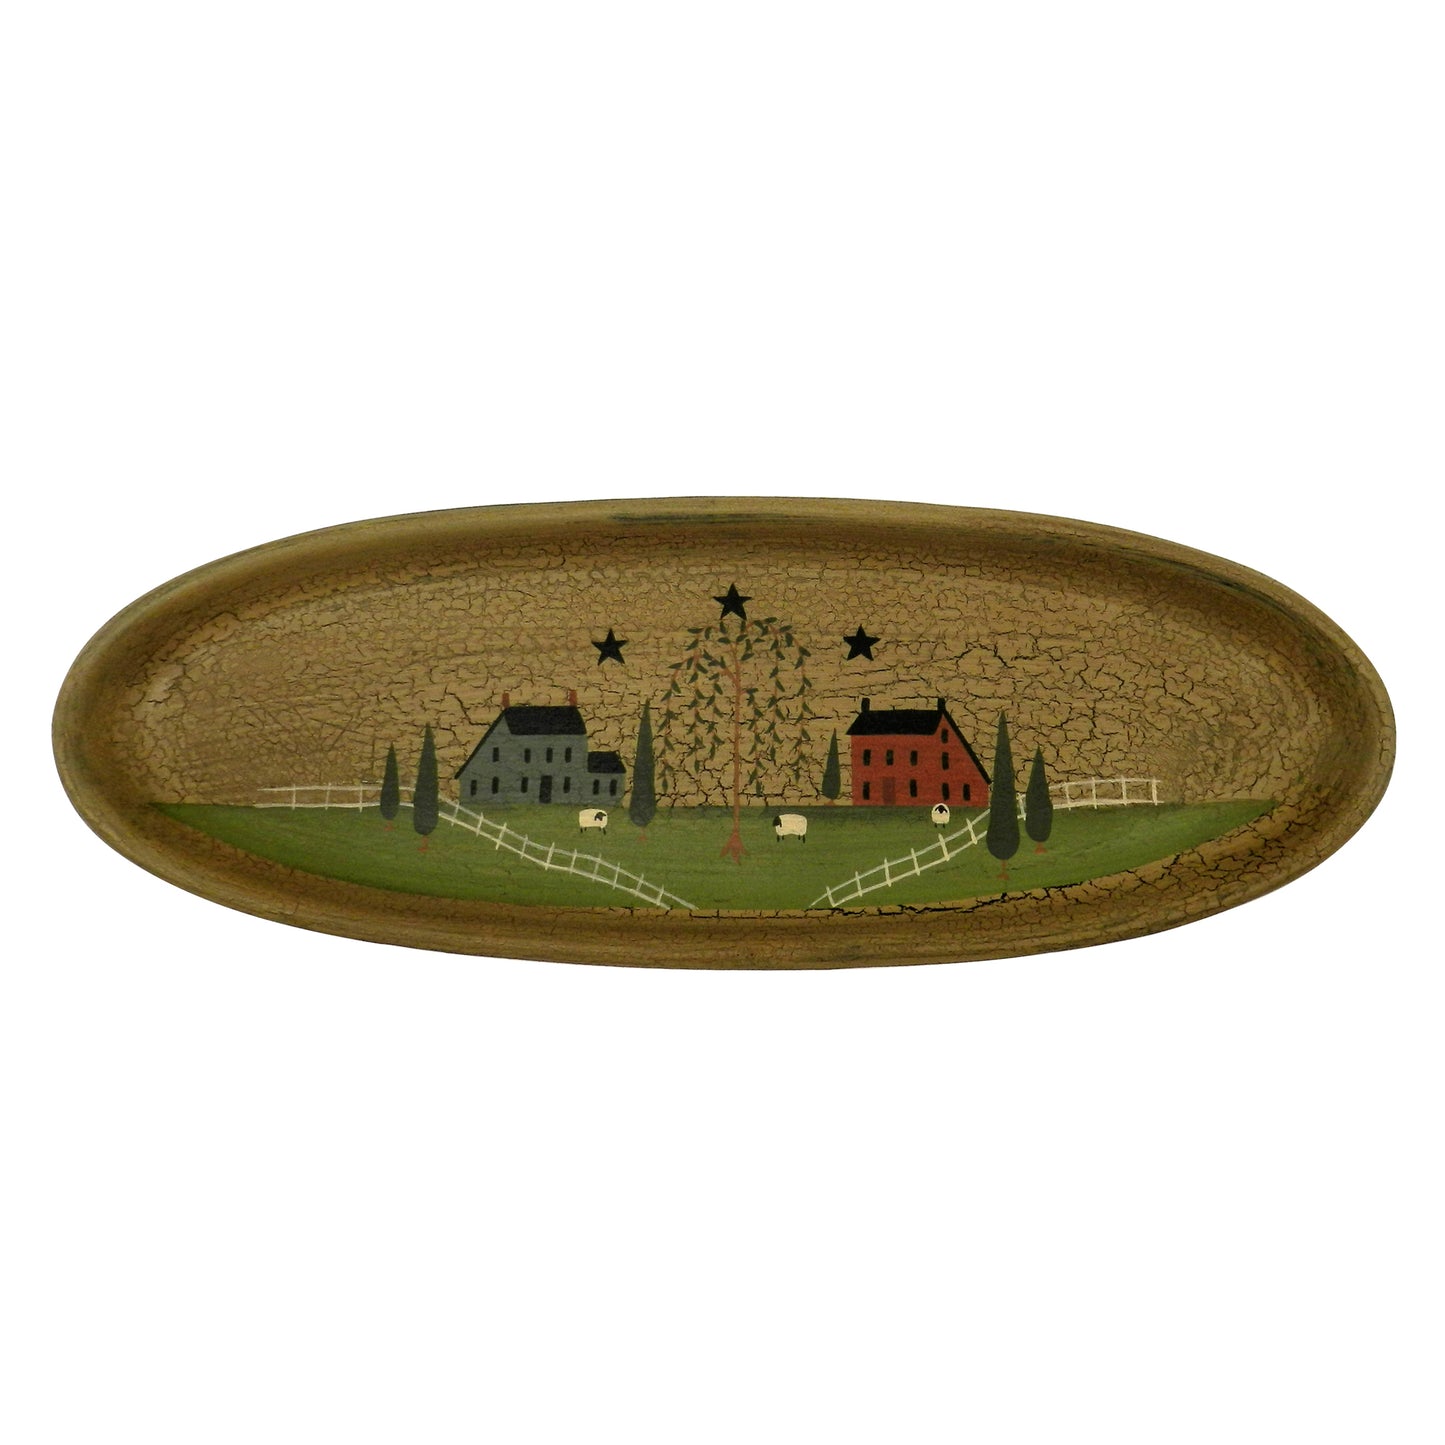 CVHOMEDECO. Primitive Rustic House Willow Tree Sheep Wood Decorative Plate Oval Crackled Display Wooden Plate Home Décor Art, 15.5 X 5.75 Inch